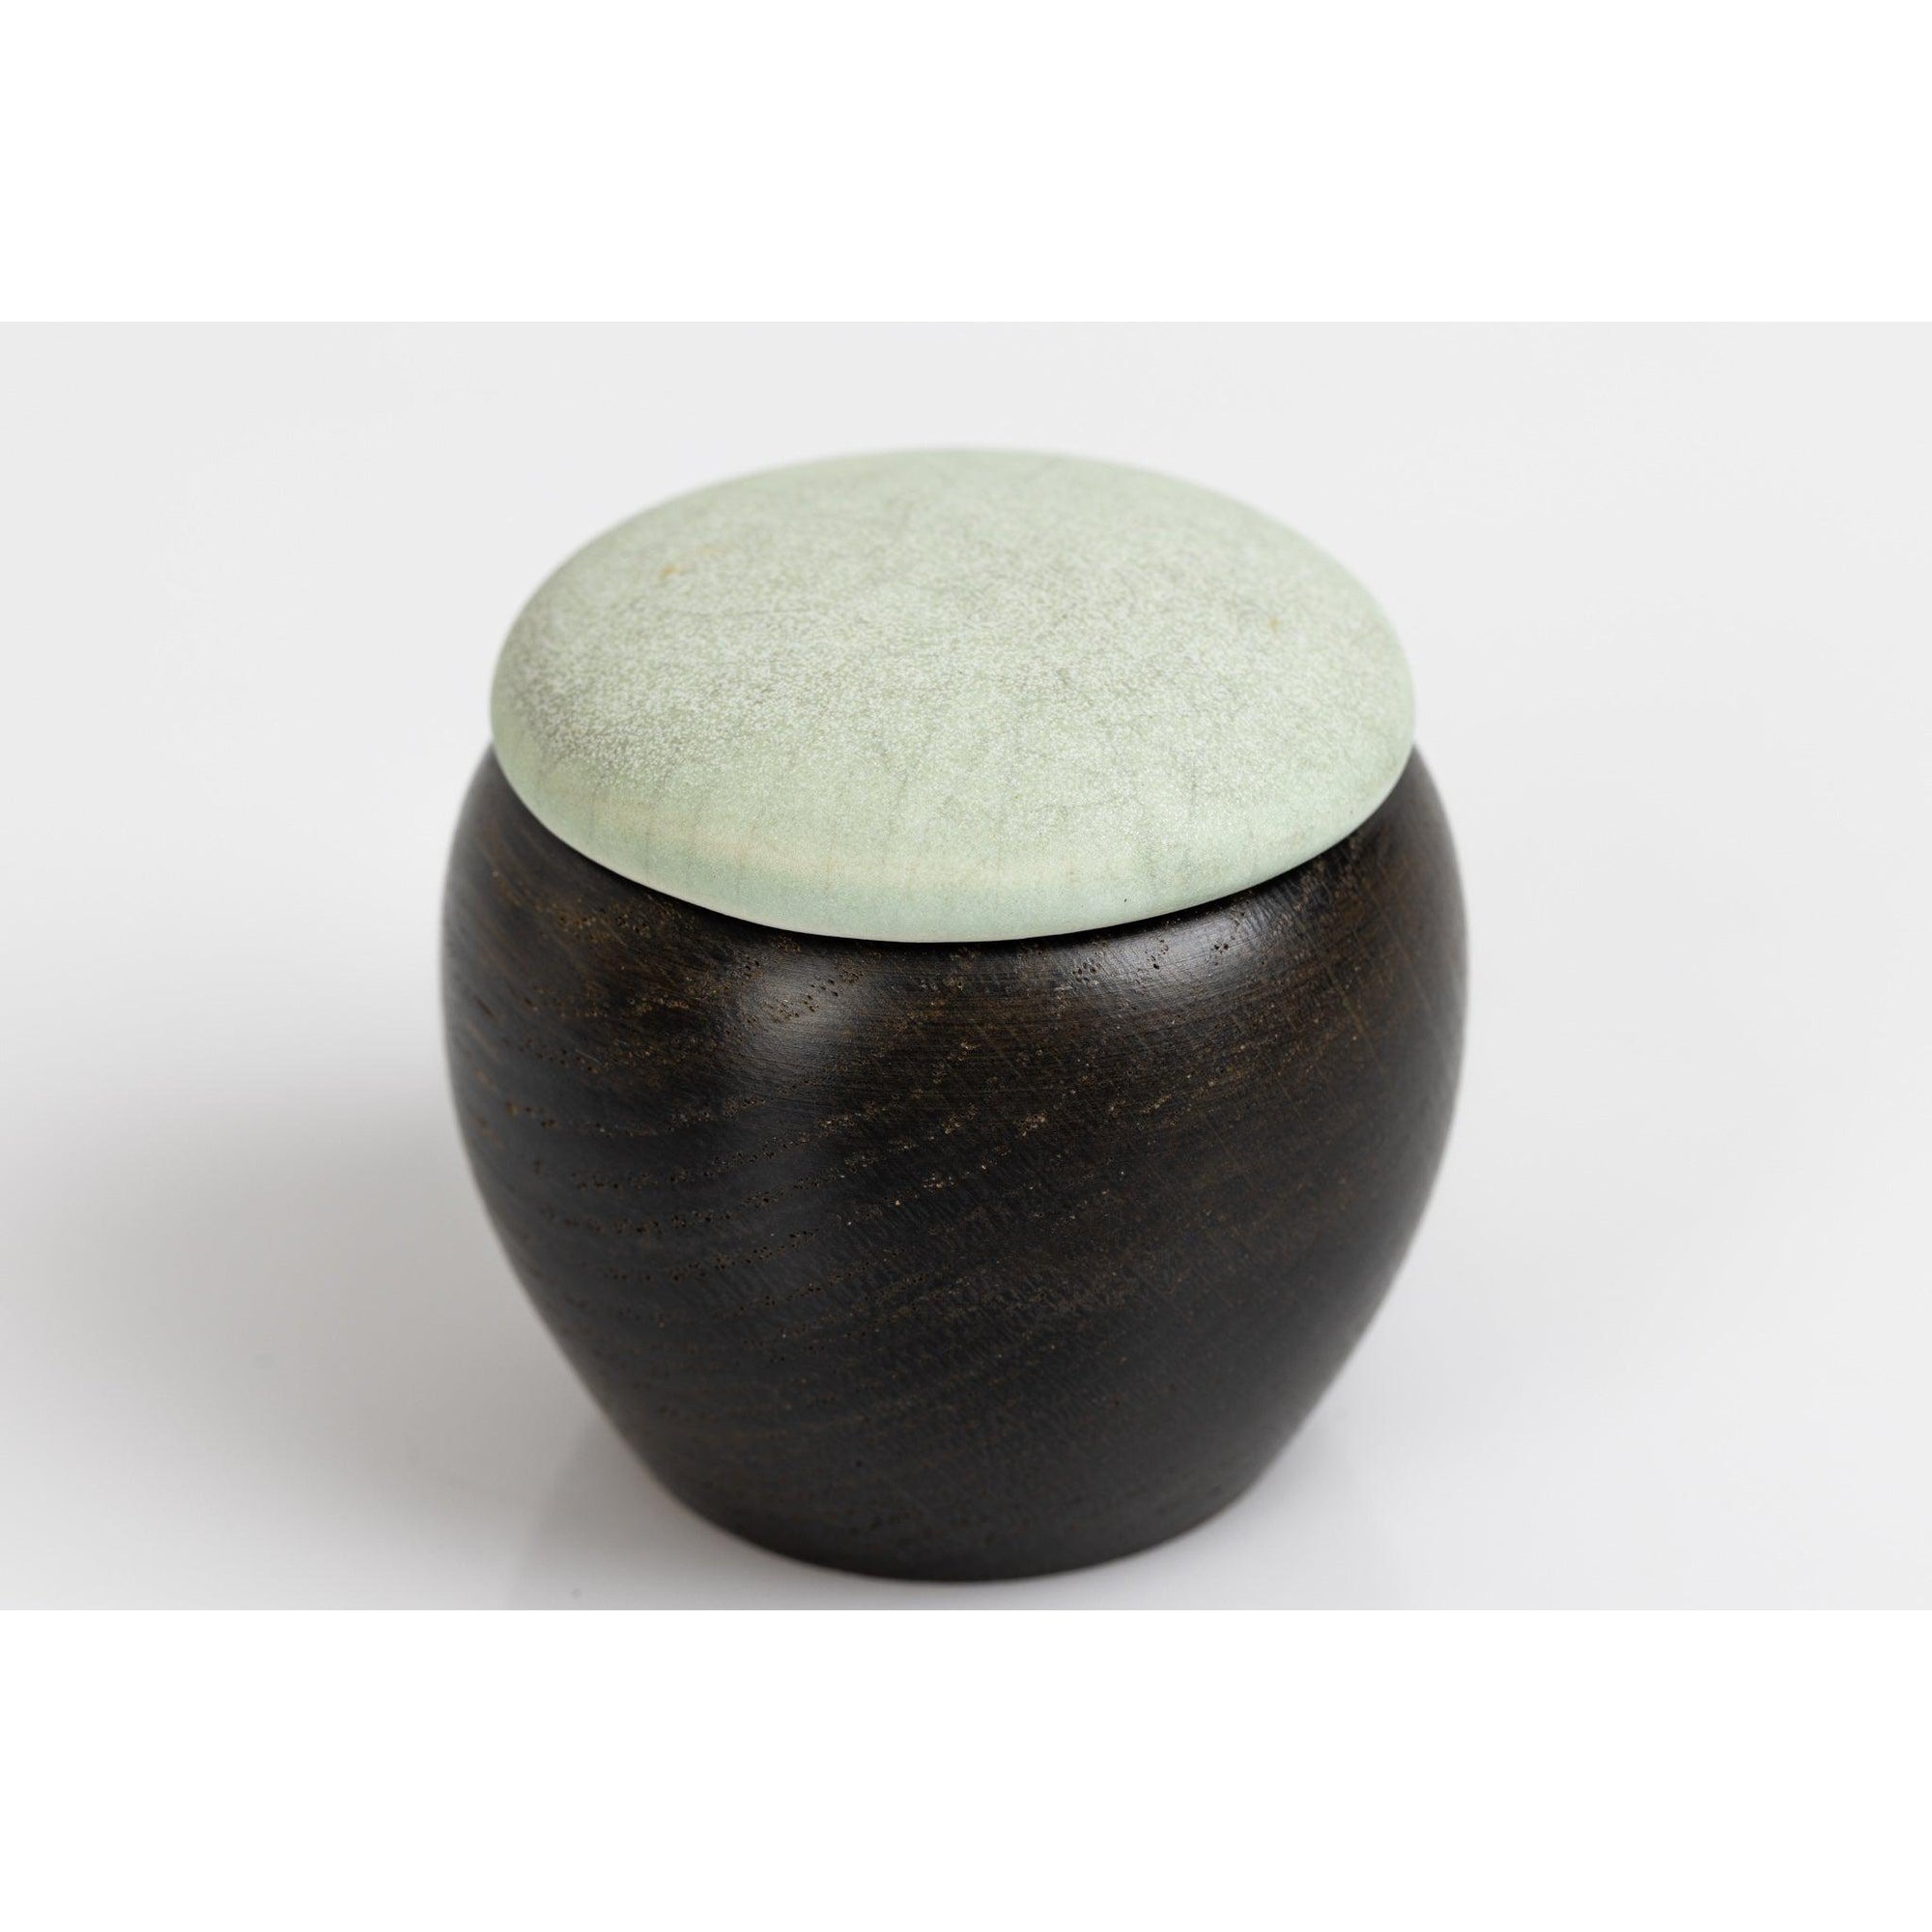 KSL1 Wave Pot by Kate Schuricht, available at Padstow Gallery, Cornwall